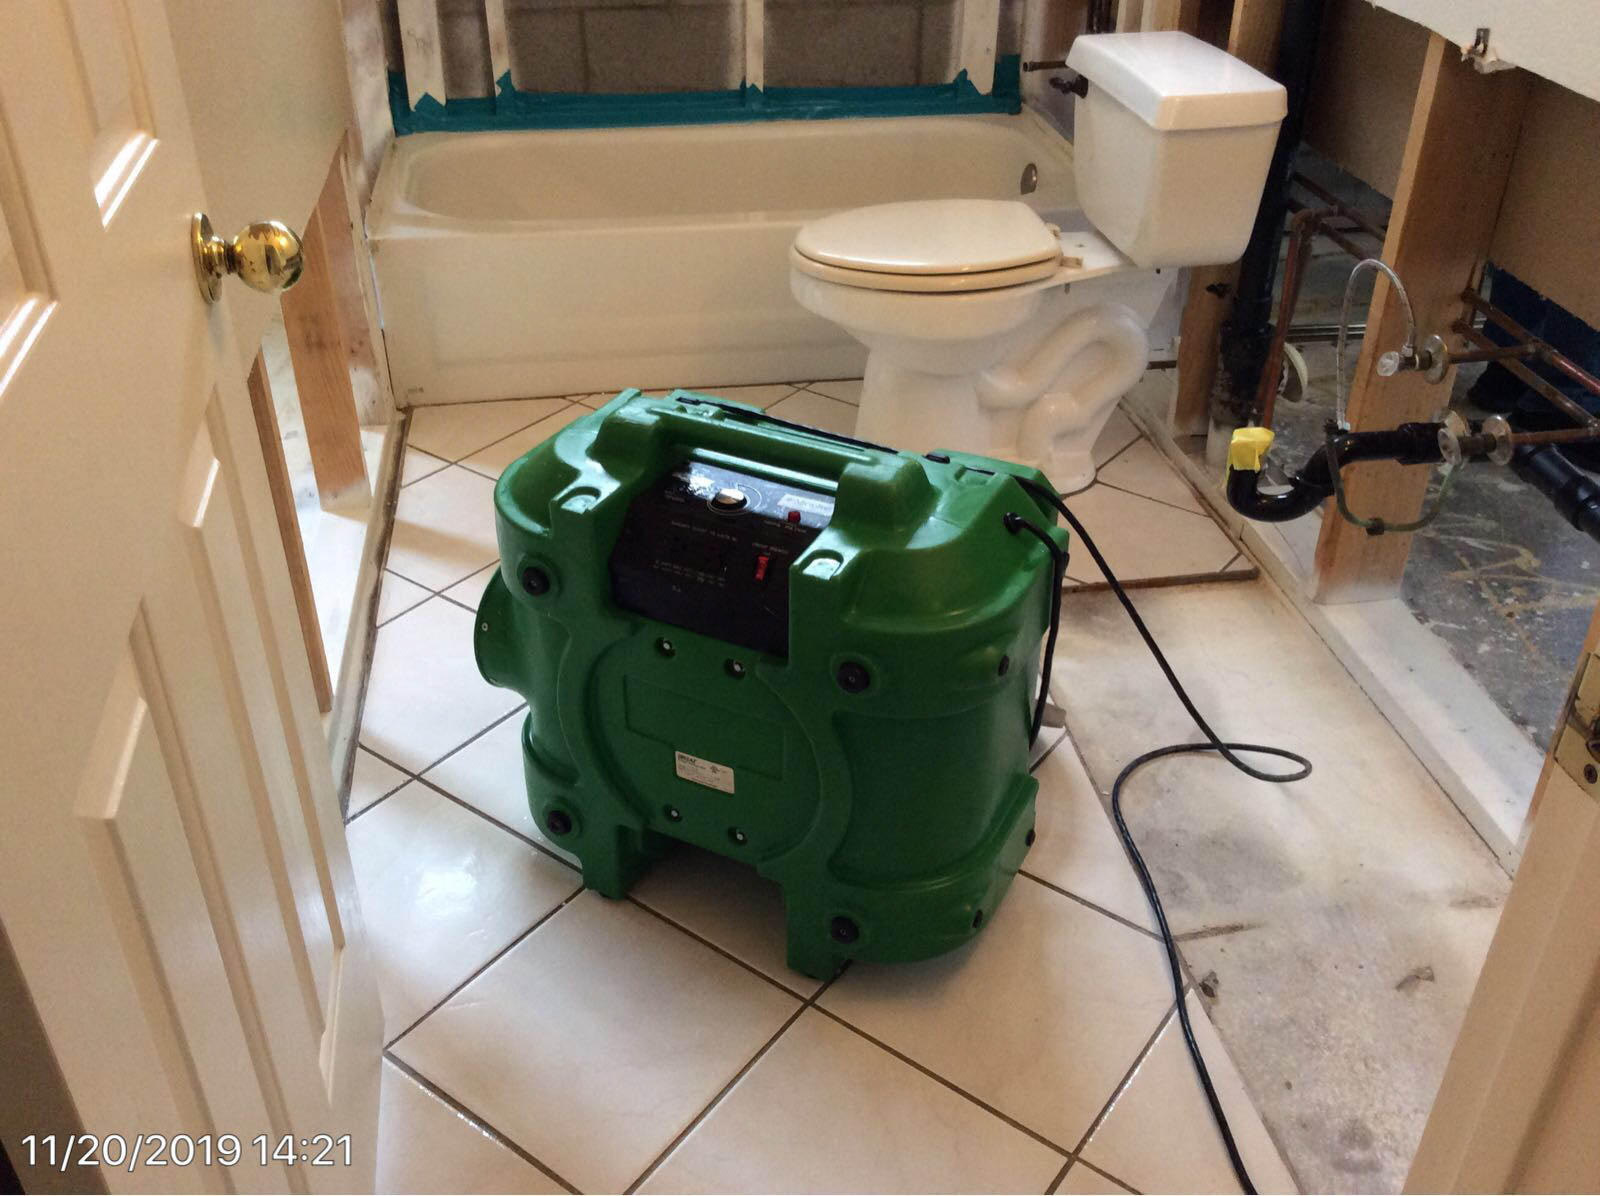 SERVPRO of Peoria / West Glendale responded to this water damage event.